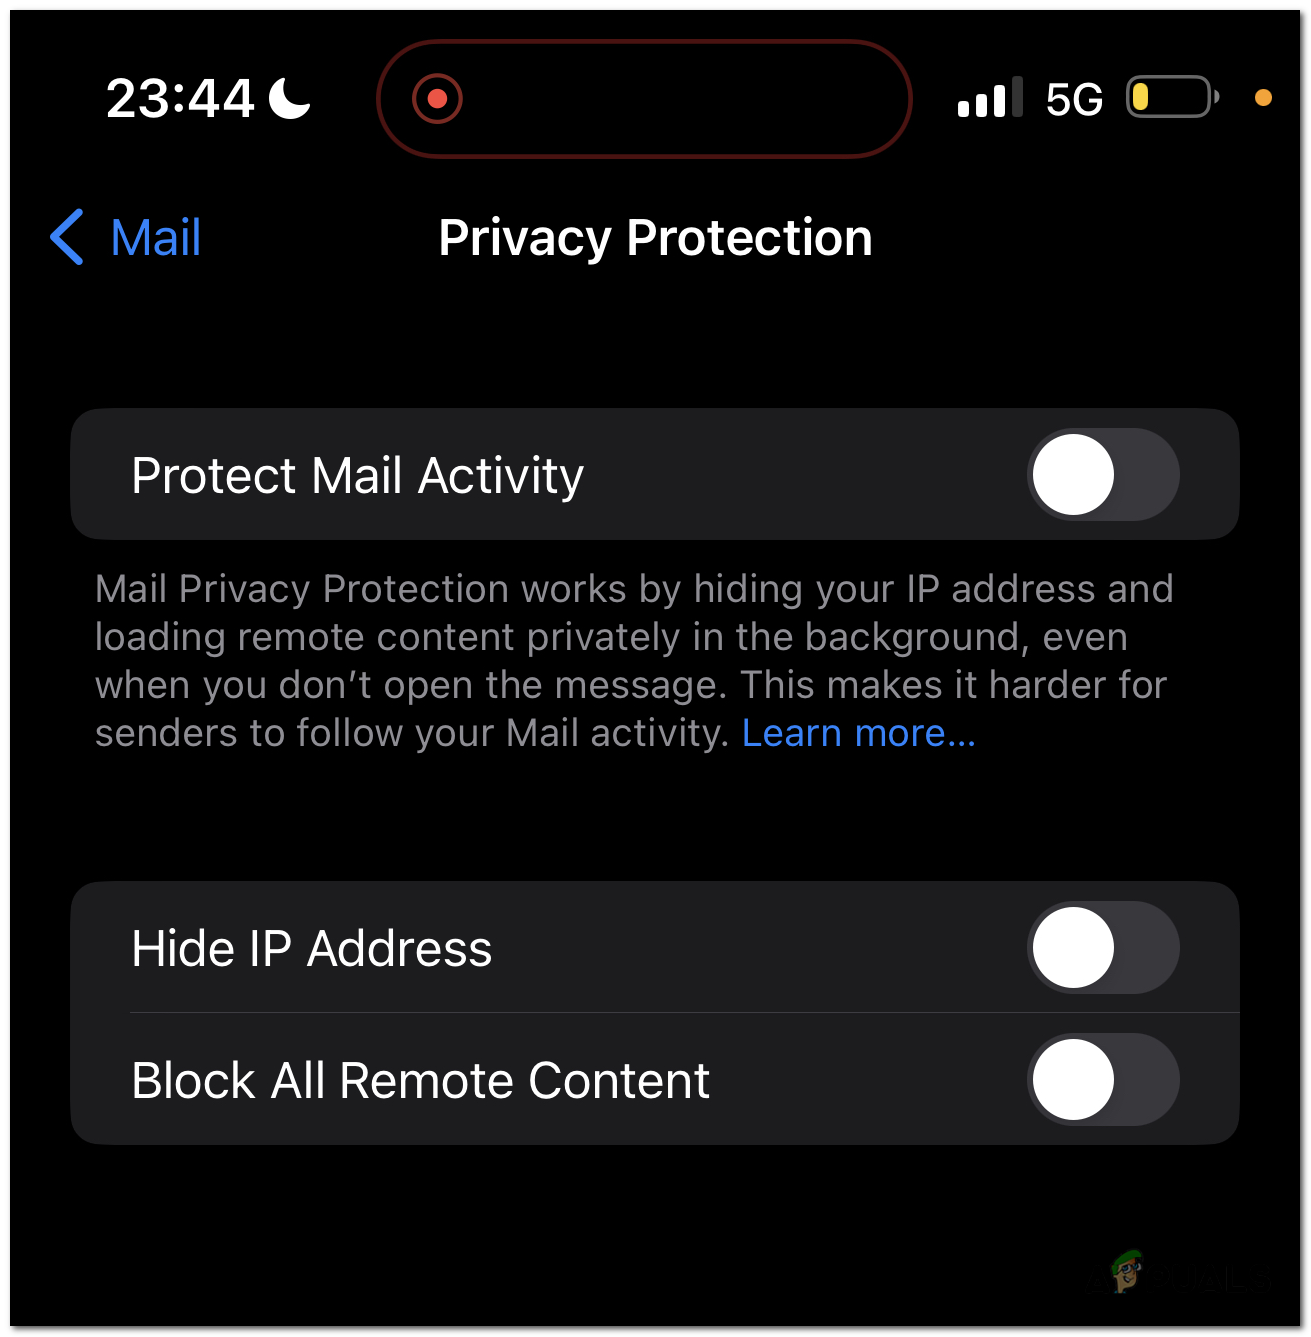 Turn off the "Protect Mail Activity", "Block All Remote Content" and "Hide IP Address" settings.